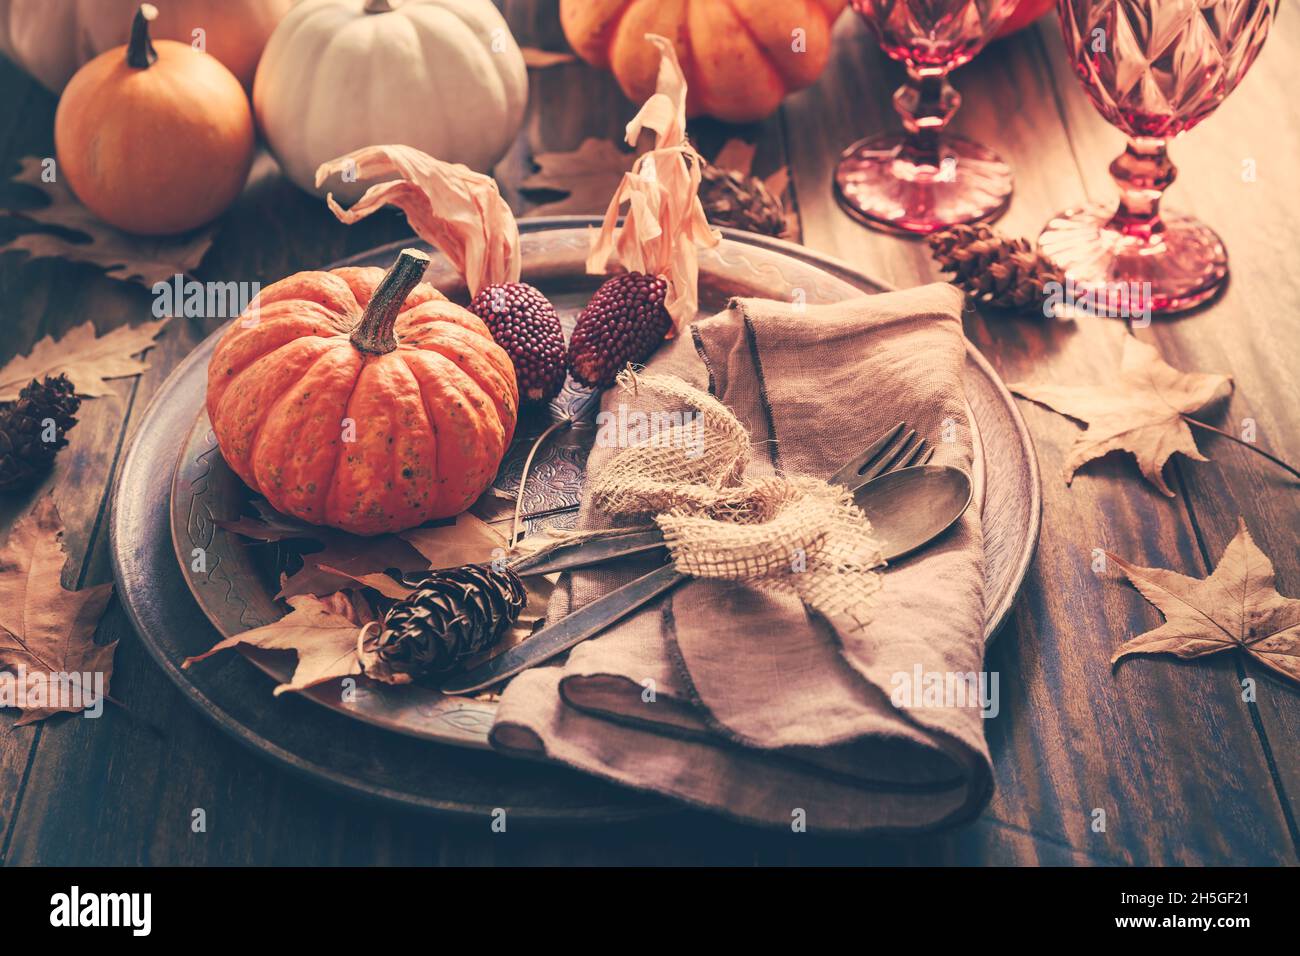 Place setting for Thanksgiving with pumpkins and autumn leaves in vintage style Stock Photo